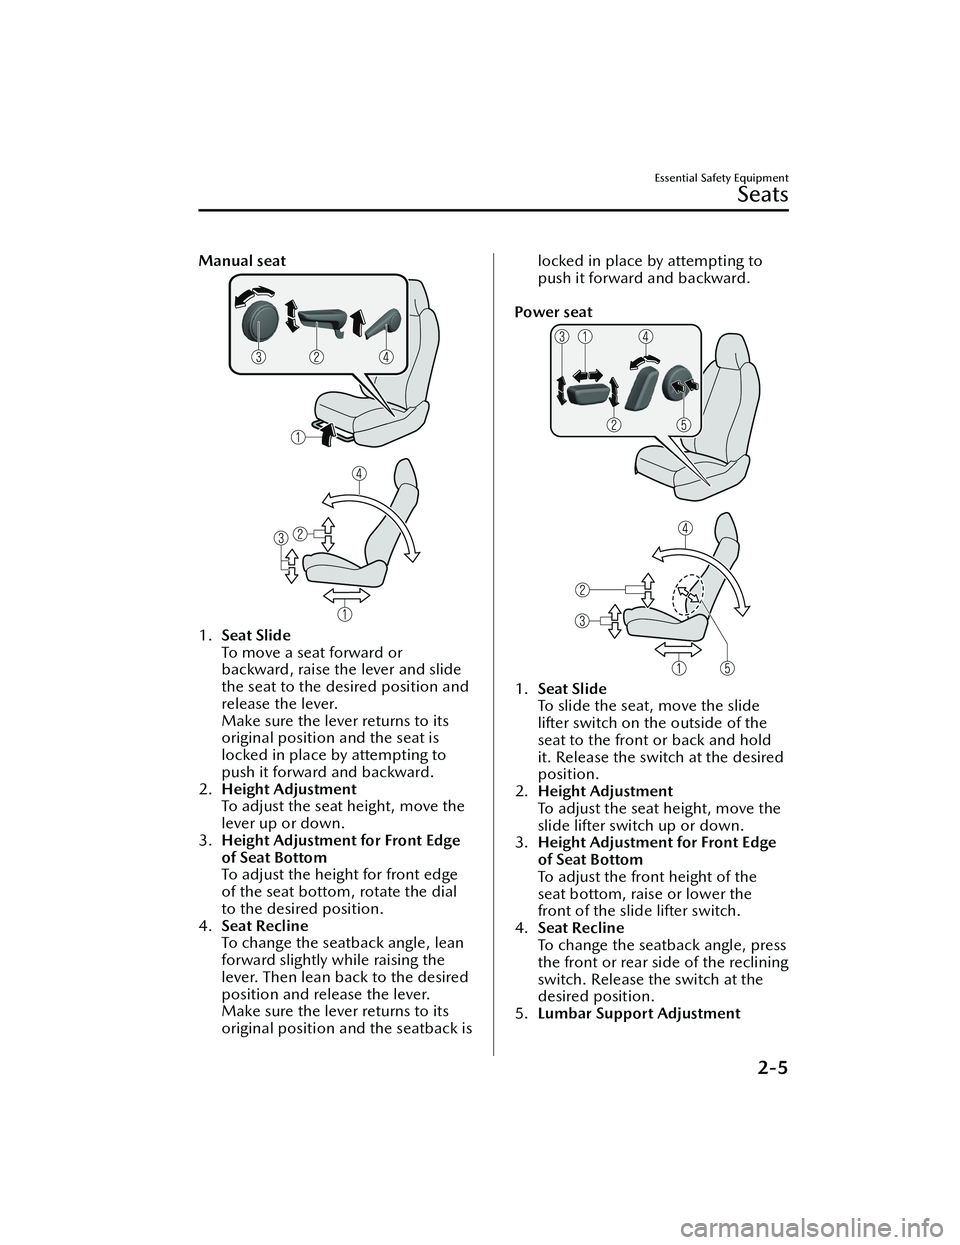 MAZDA MODEL MX-30 EV 2022  Owners Manual Manual seat
1.Seat Slide
To move a seat forward or
backward, raise the lever and slide
the seat to the desired position and
release the lever.
Make sure the lever returns to its
original position and 